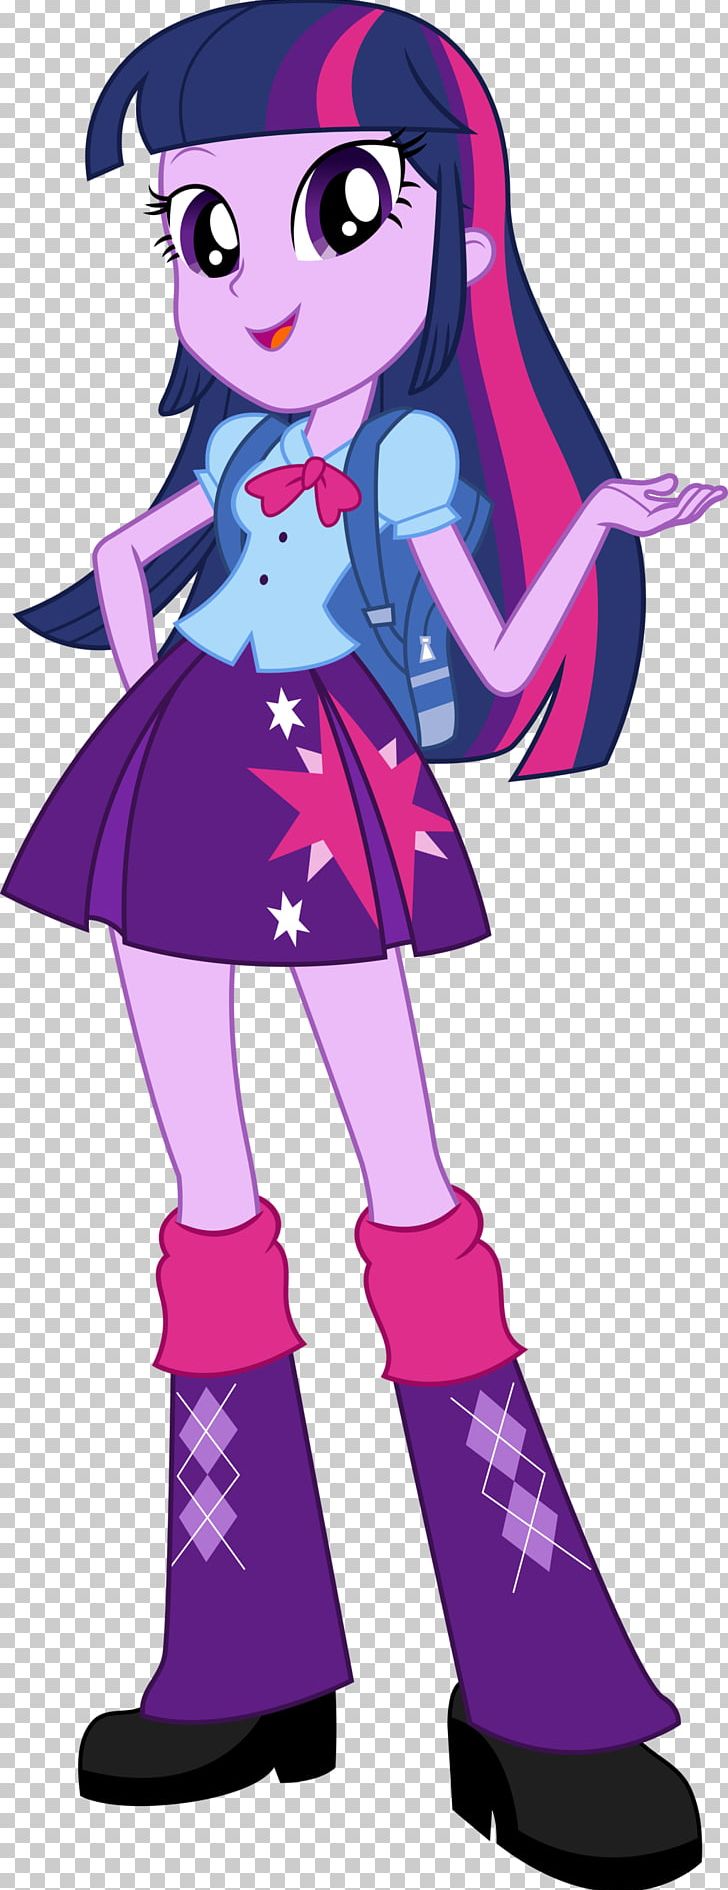 Twilight Sparkle Pinkie Pie Applejack My Little Pony: Equestria Girls PNG, Clipart, Art, Cartoon, Clothing, Equestria, Fictional Character Free PNG Download